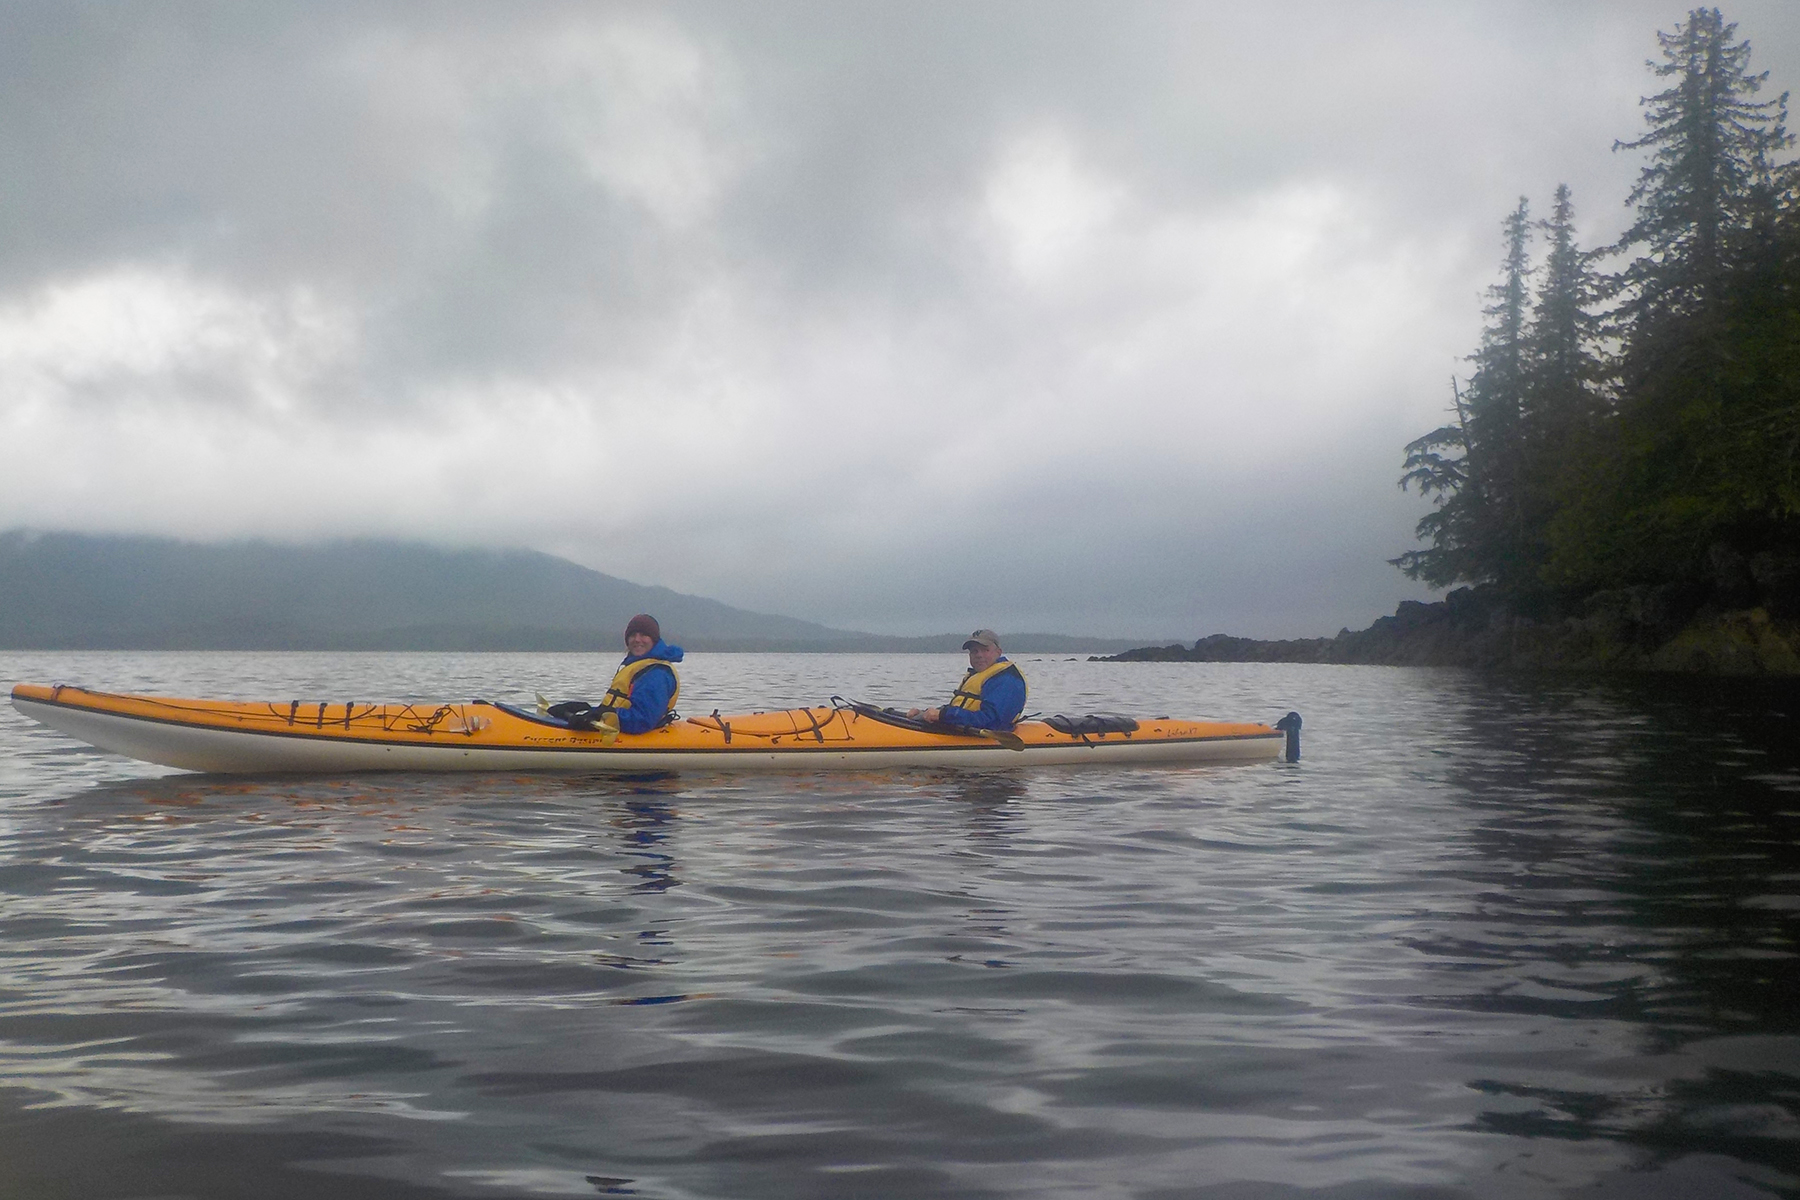  A little mist and rain don't stop us from having fun. They are part of the beauty of Southeast Alaska. 